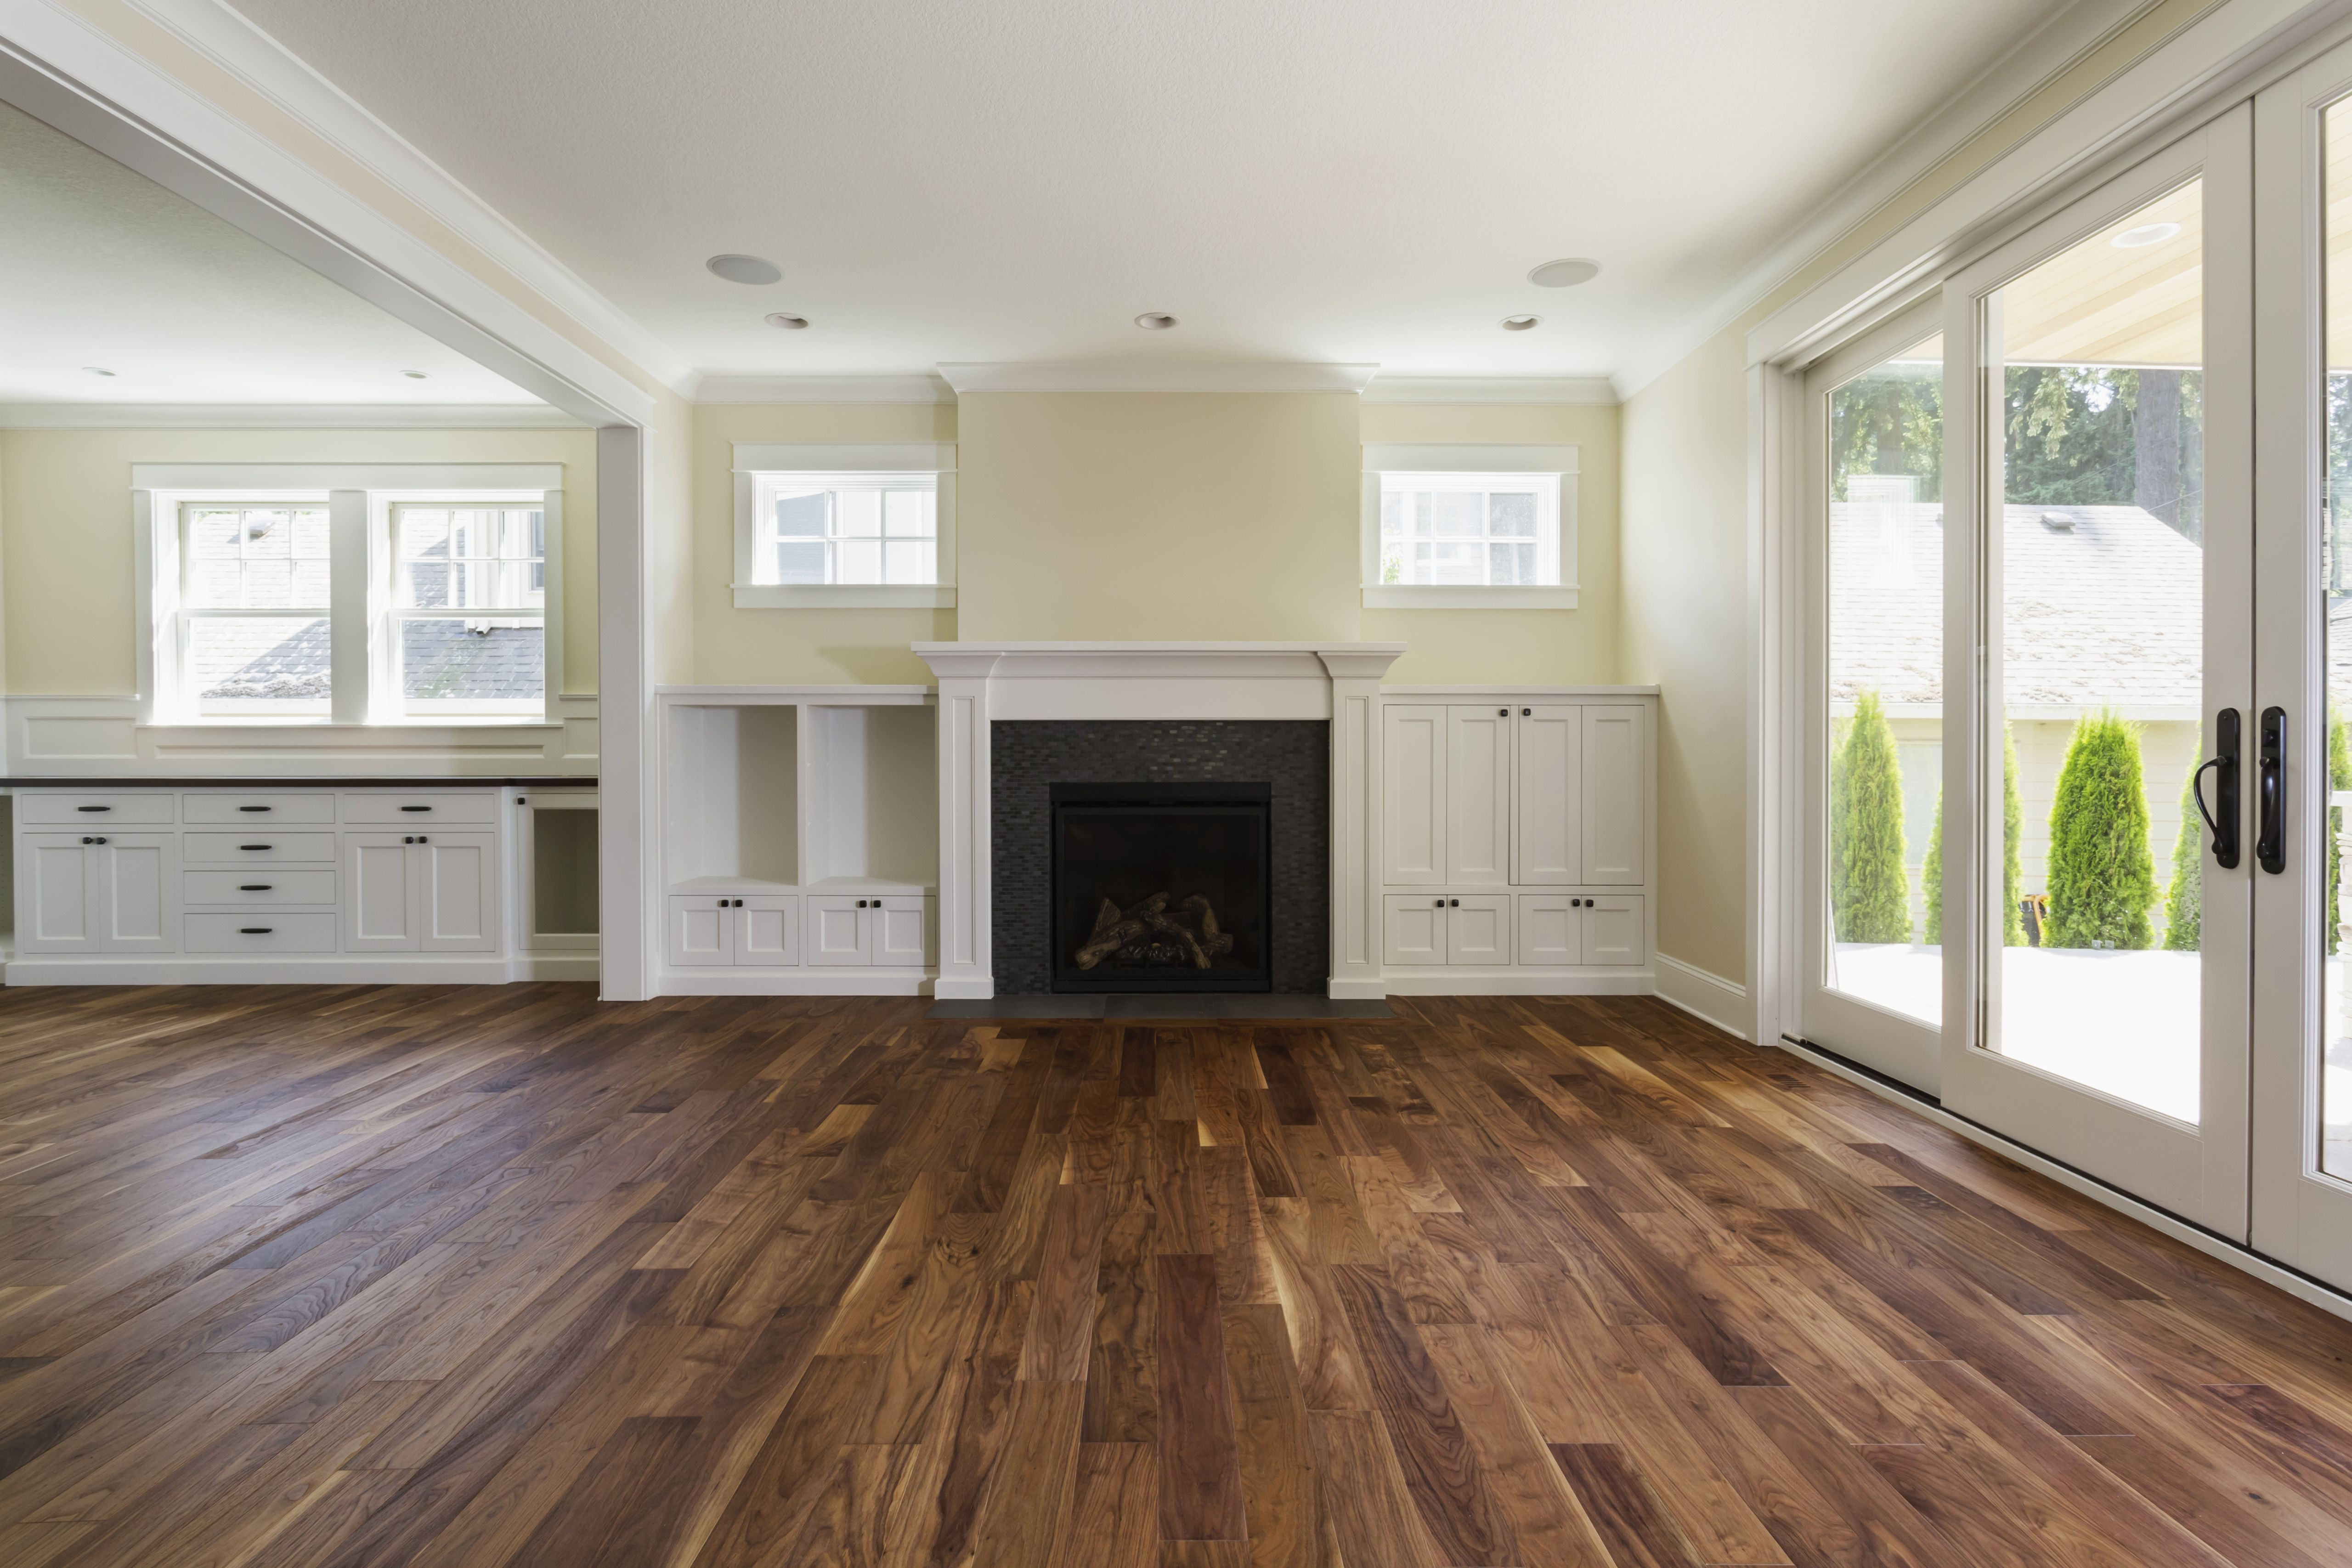 27 Wonderful Hardwood Flooring Options and Cost 2024 free download hardwood flooring options and cost of the pros and cons of prefinished hardwood flooring pertaining to fireplace and built in shelves in living room 482143011 57bef8e33df78cc16e035397